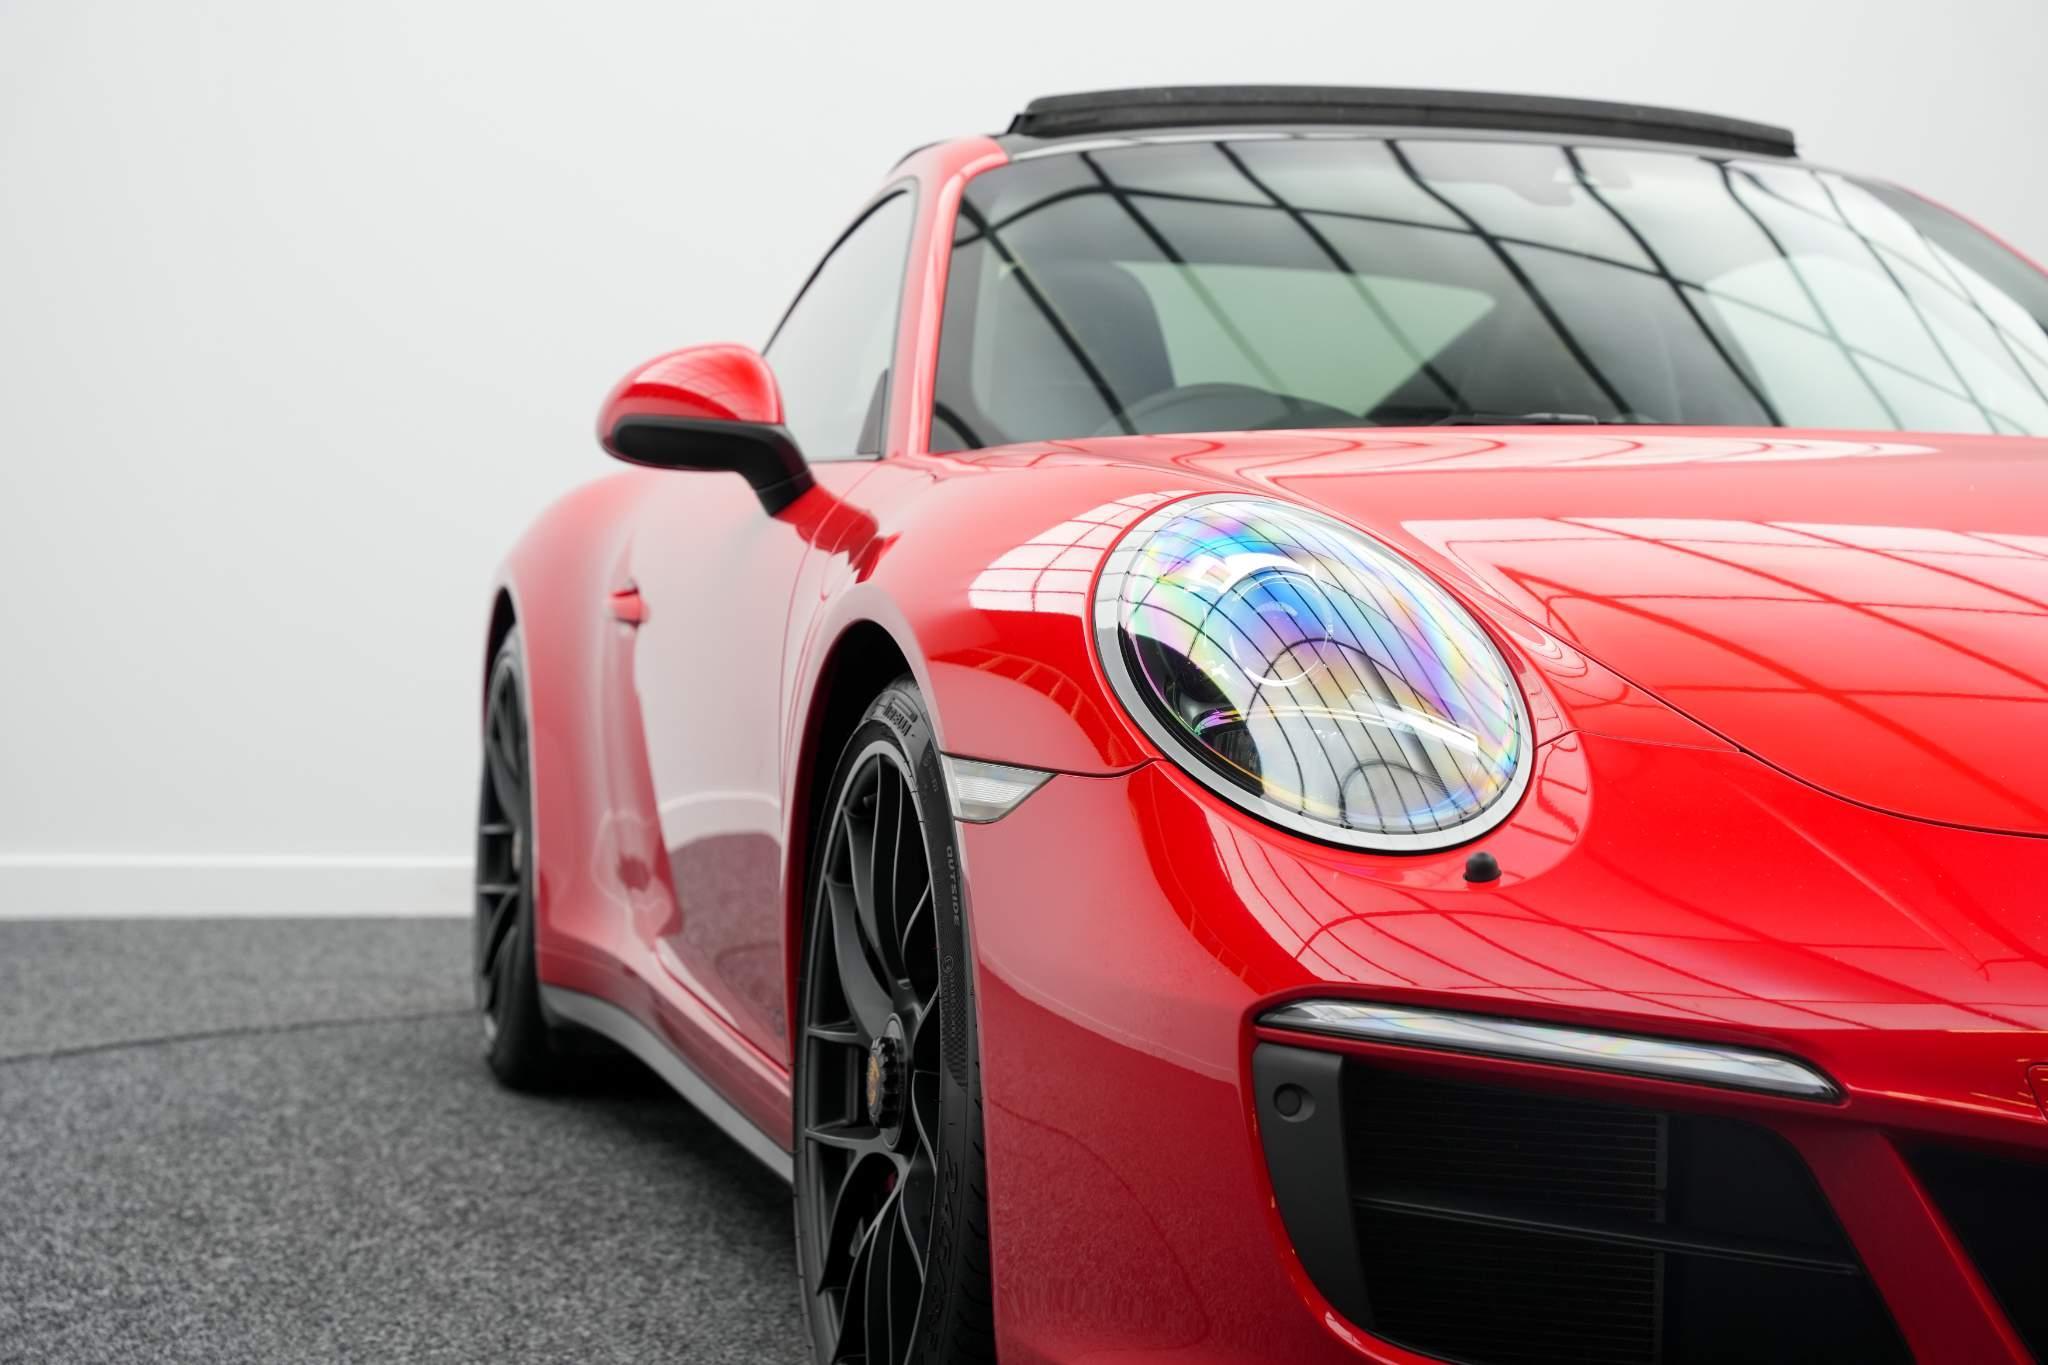 Used 2018 Porsche 911 3.0T 991 Carrera GTS PDK Euro 6 2dr £77,480 16,000  miles Red